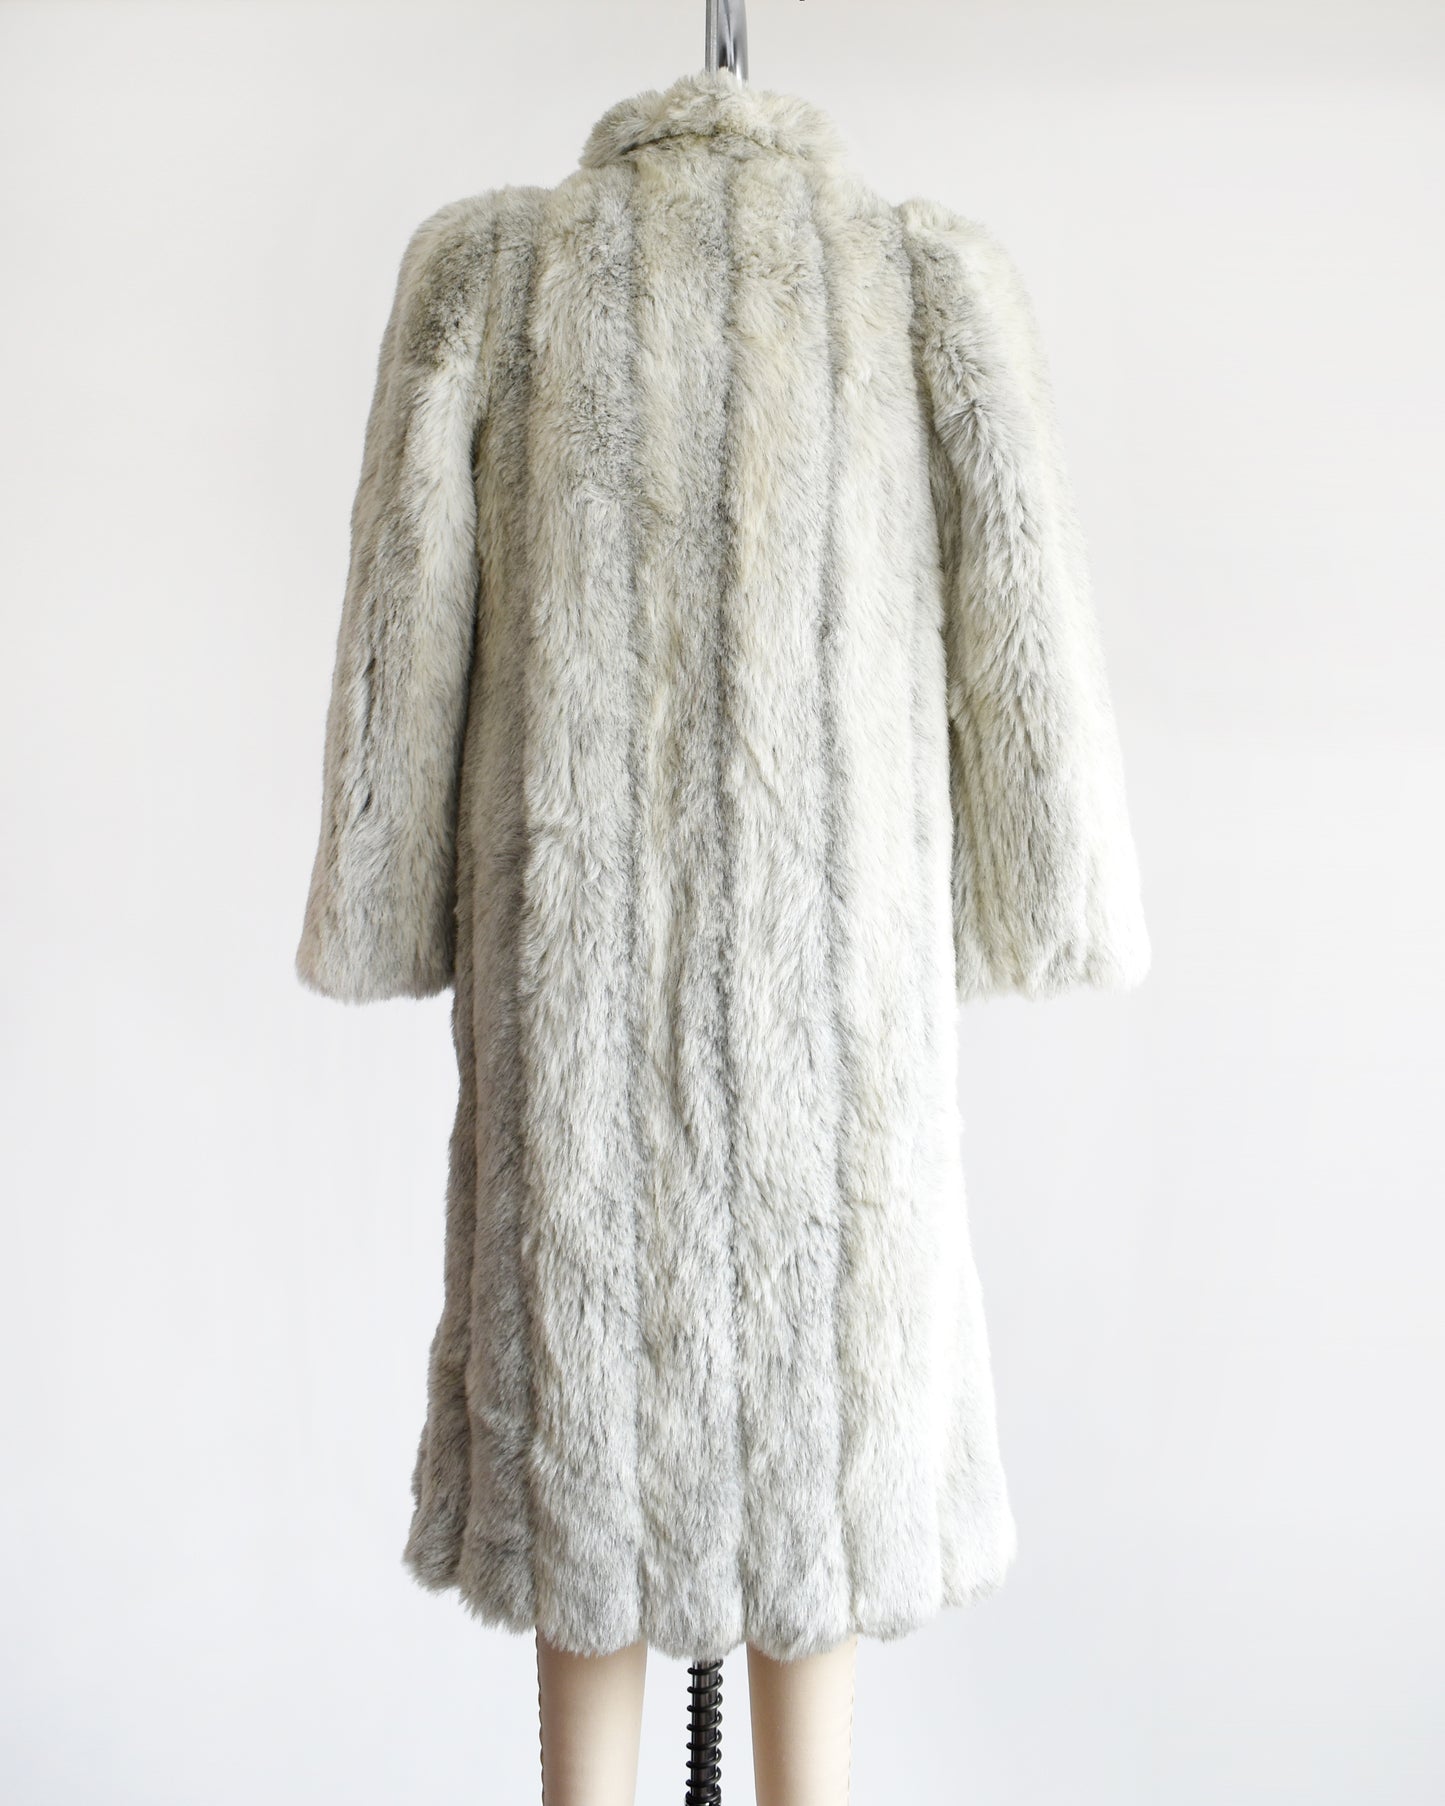 Back view of a vintage 1980s  cream colored faux fur coat with light and dark gray stripes. 